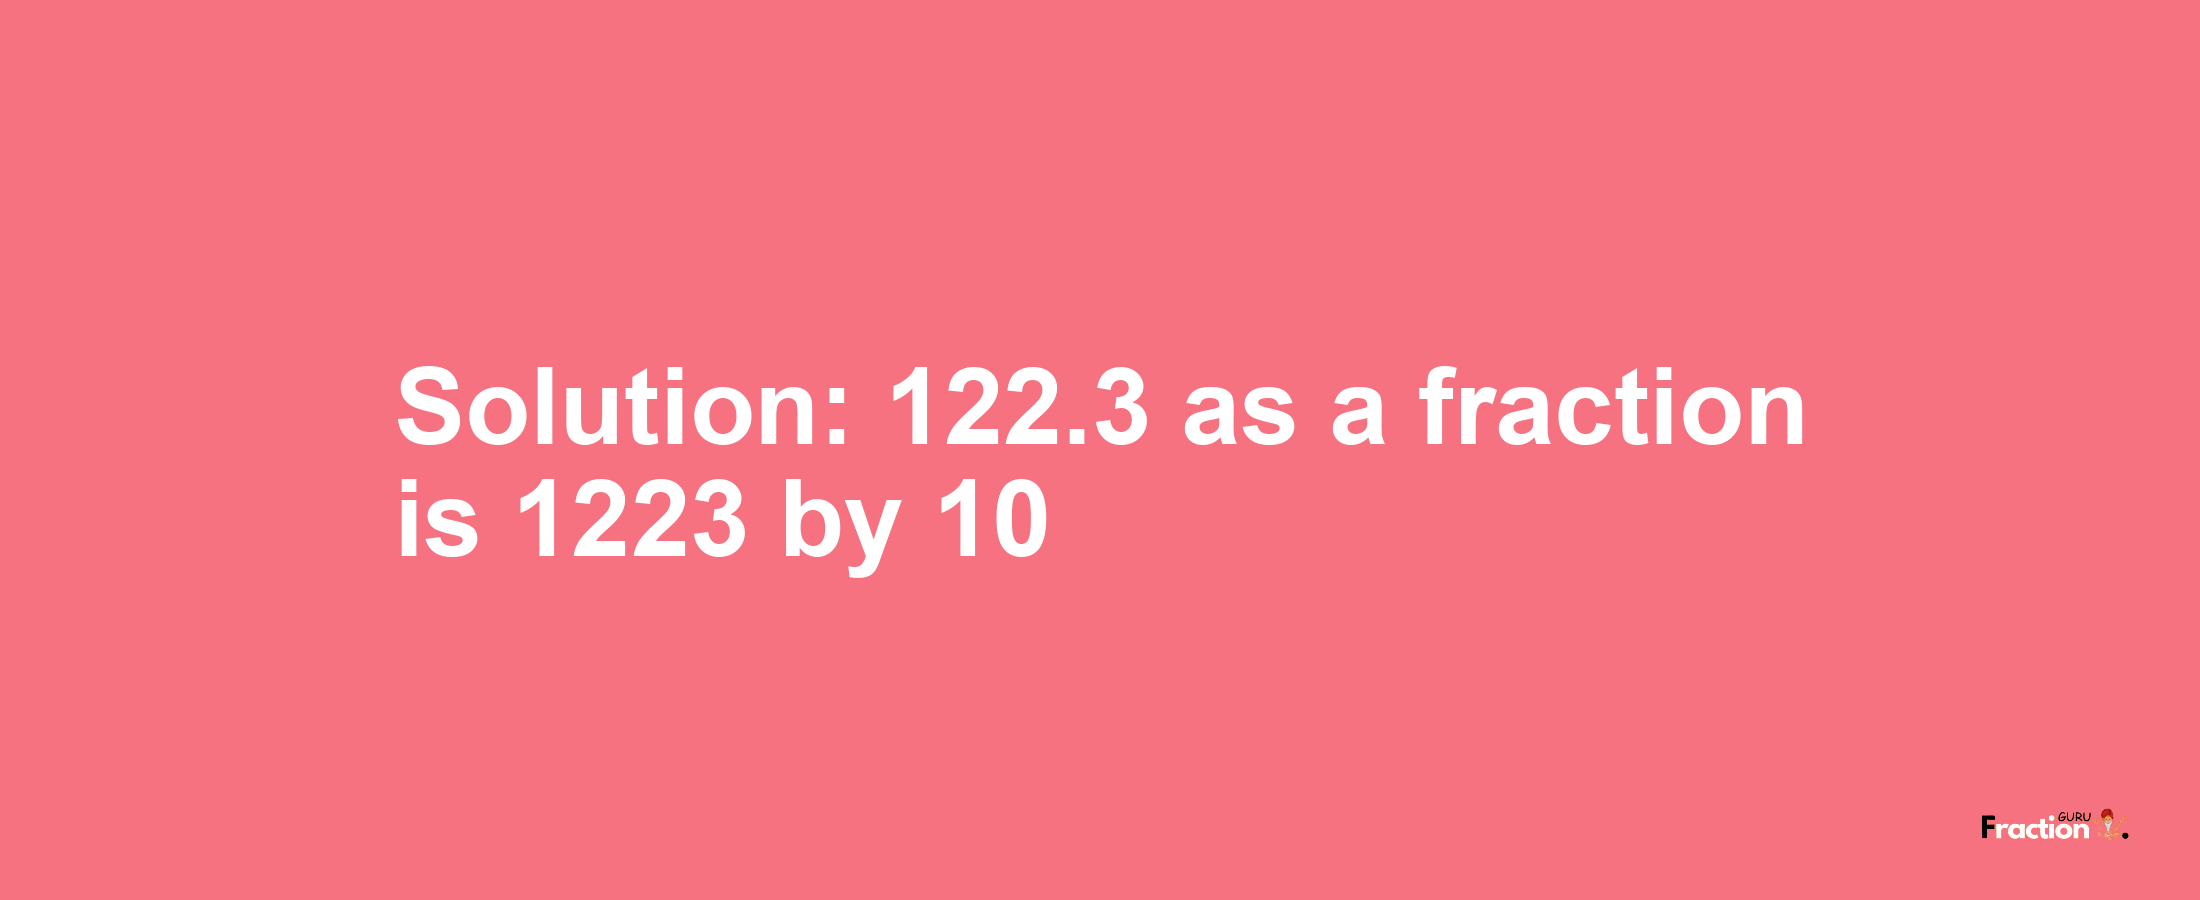 Solution:122.3 as a fraction is 1223/10